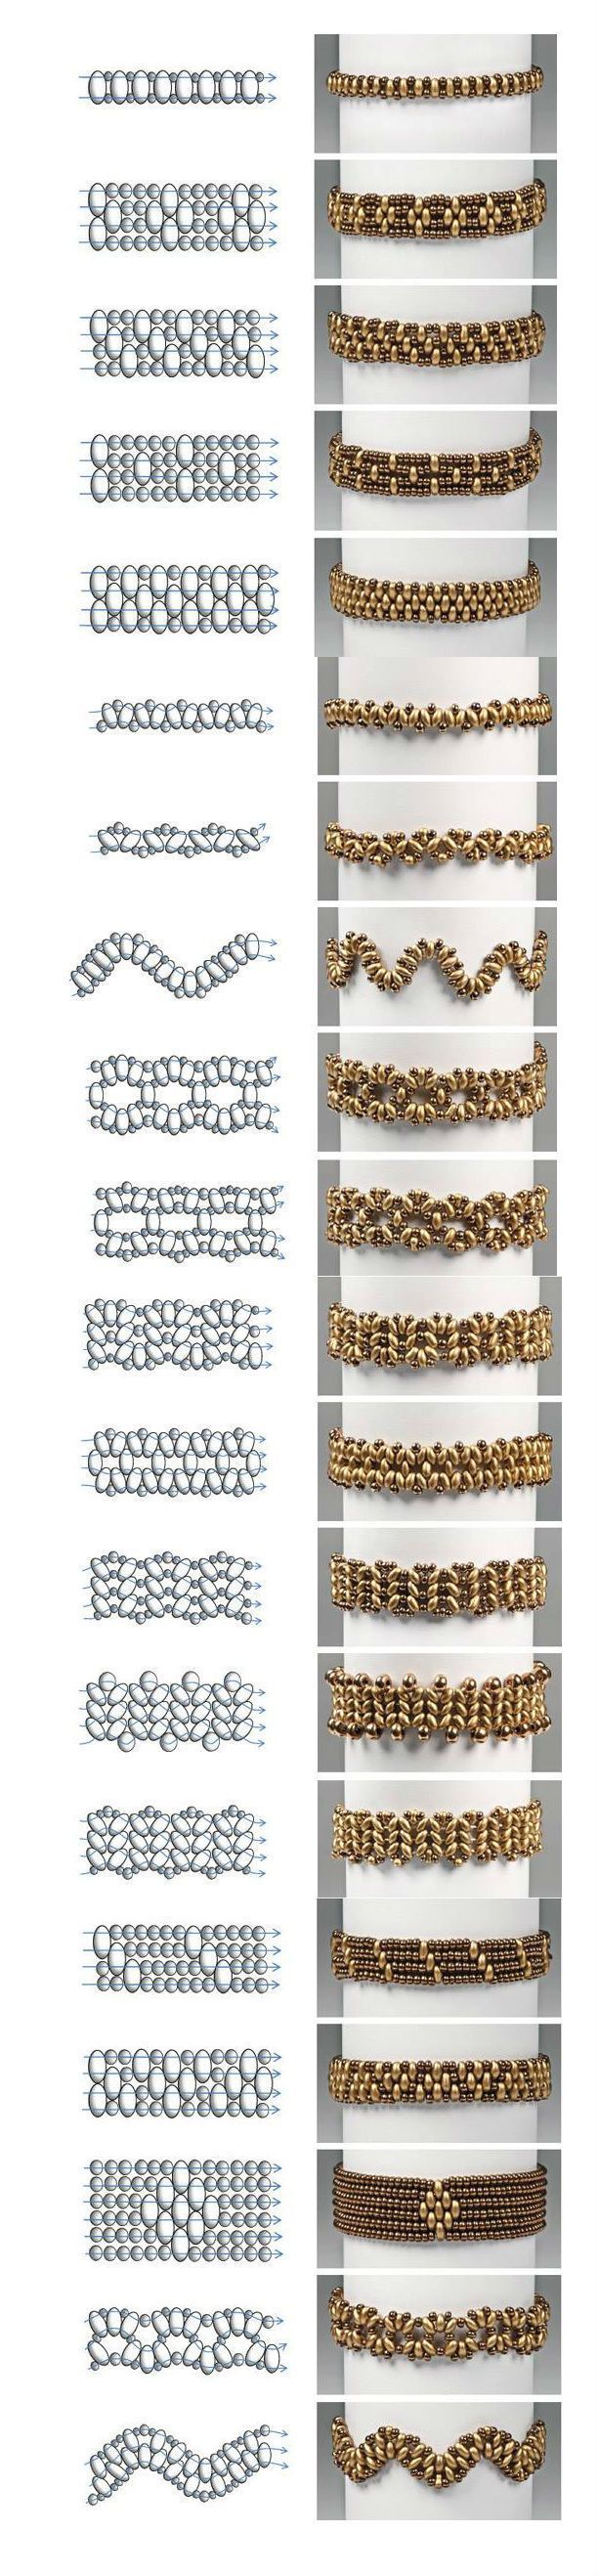 Preciosa Projects – Twin Bracelets Easy and Simple Pattern featured in Bead-Patterns.com Newsletter!: